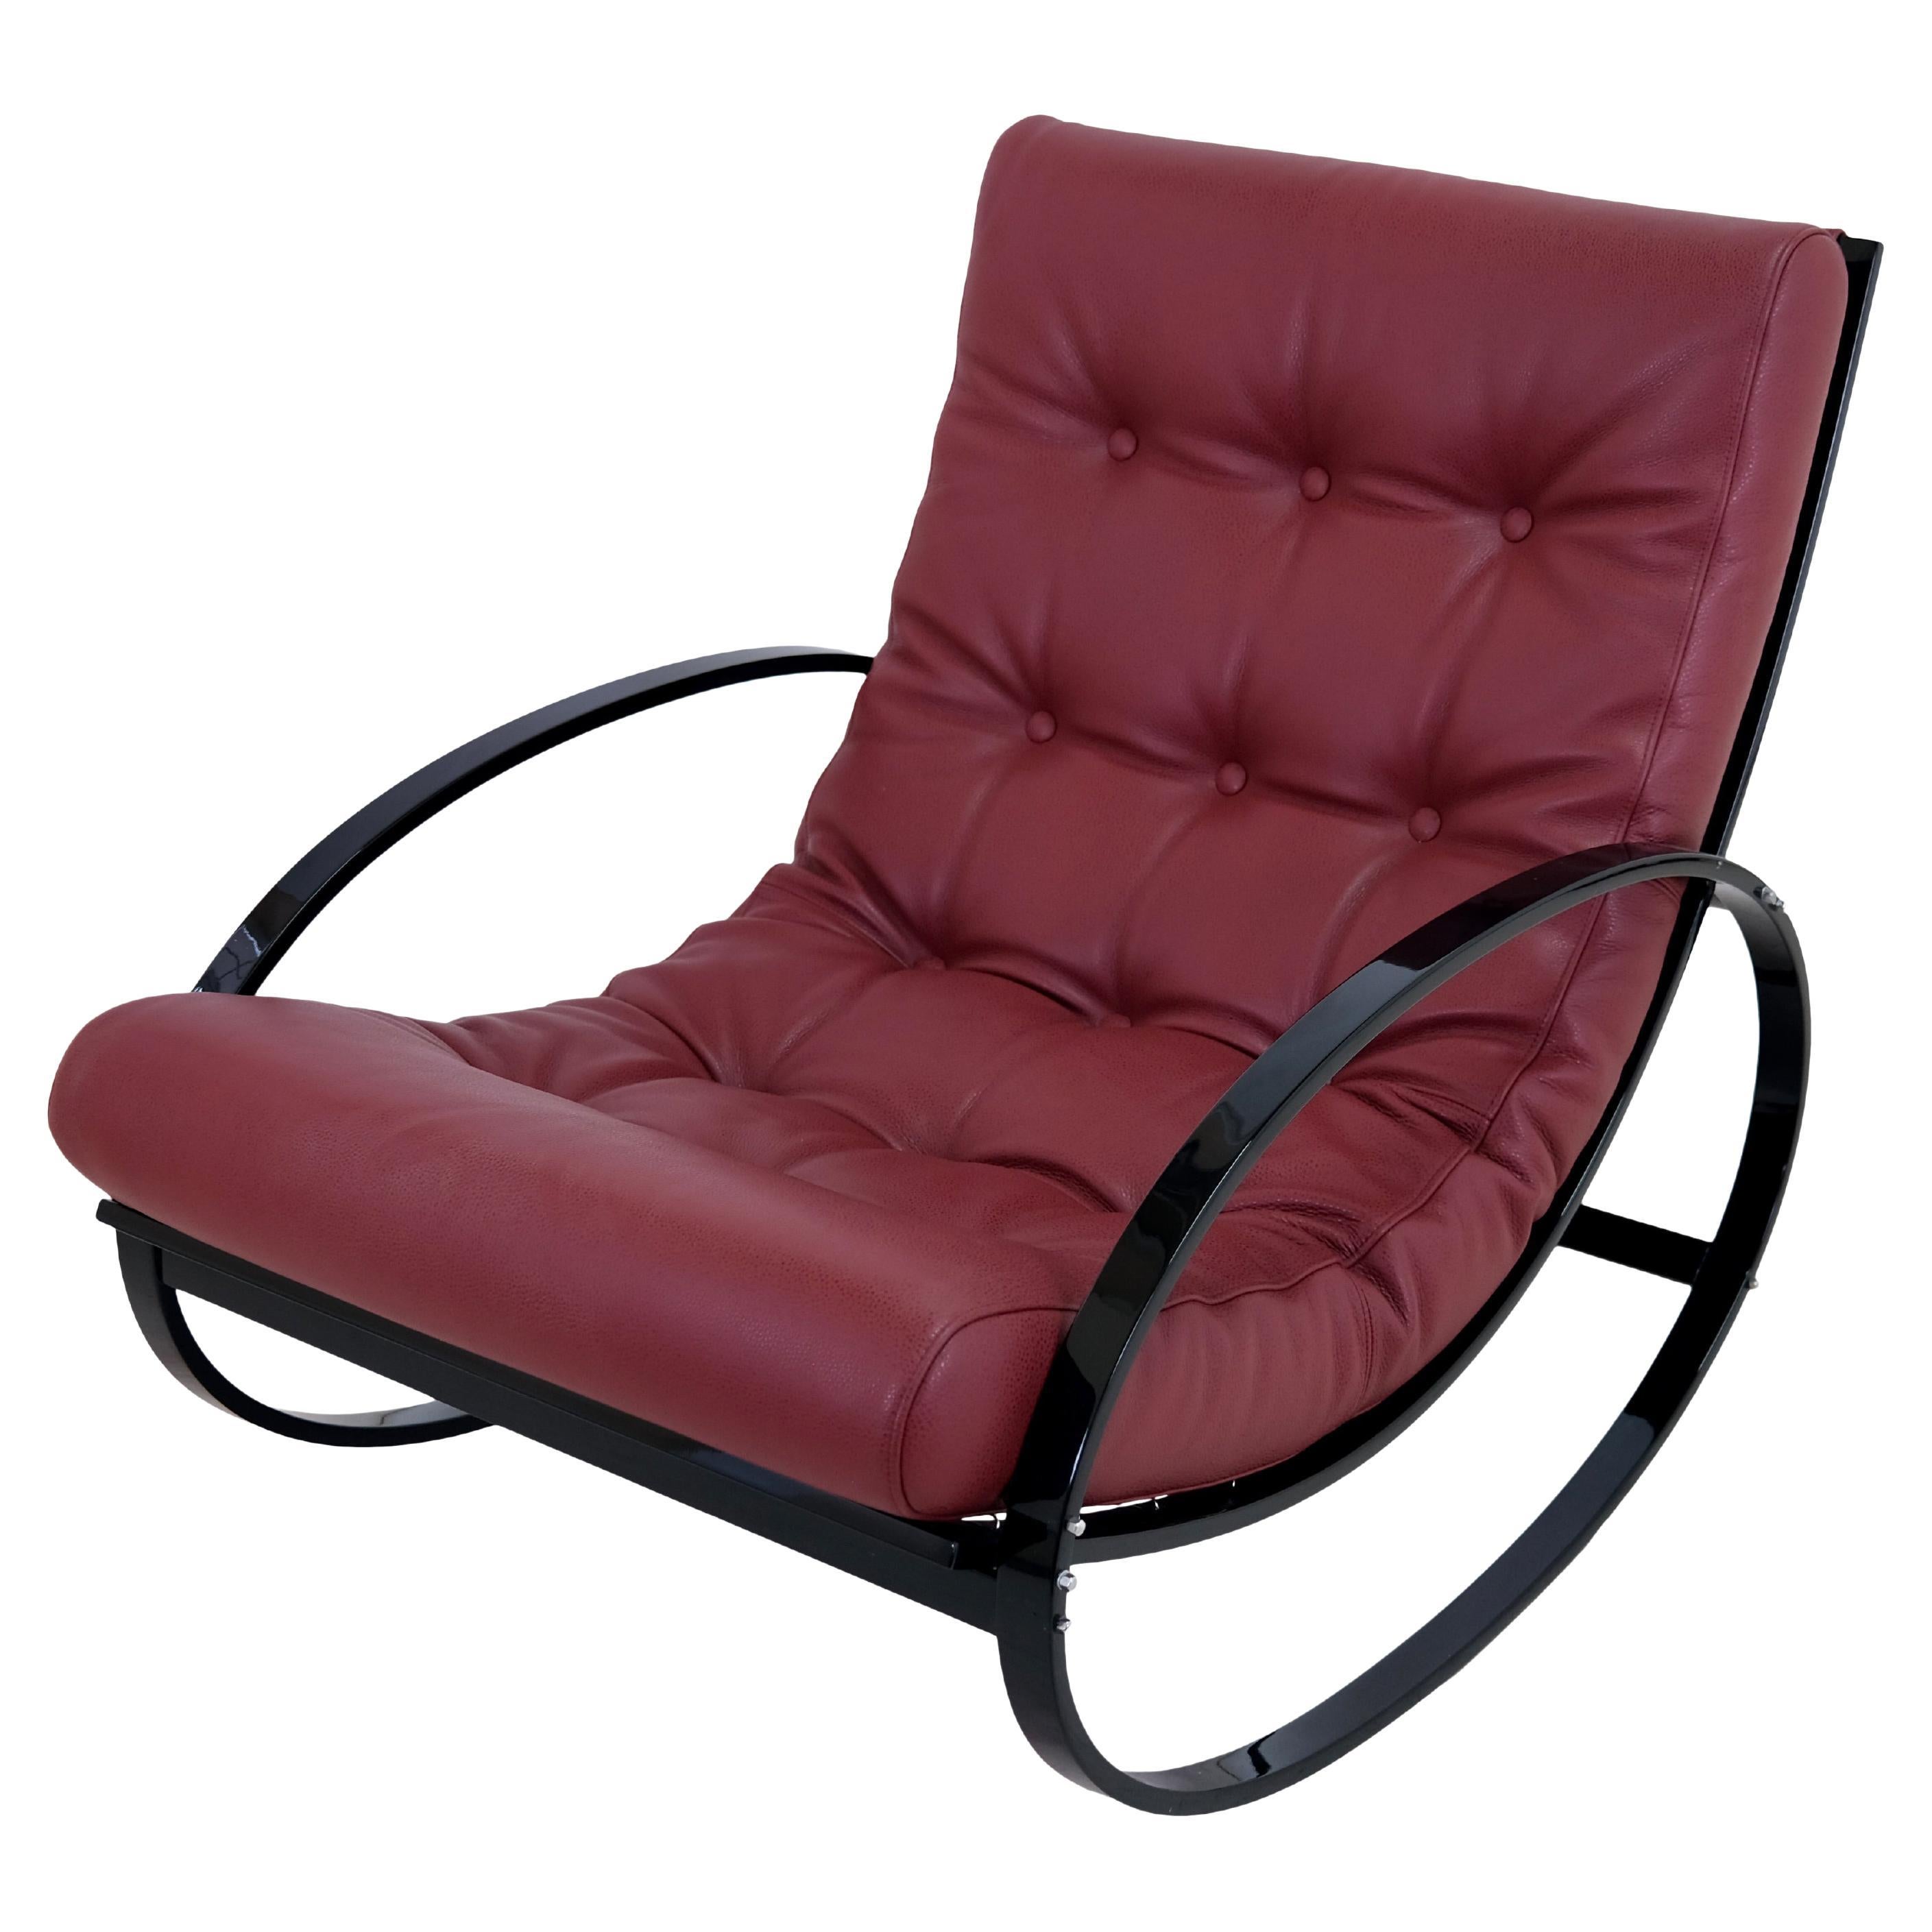 Mid-Century Modern Black Steel Tube Rocking Chairs with Red Leather Upholstery For Sale